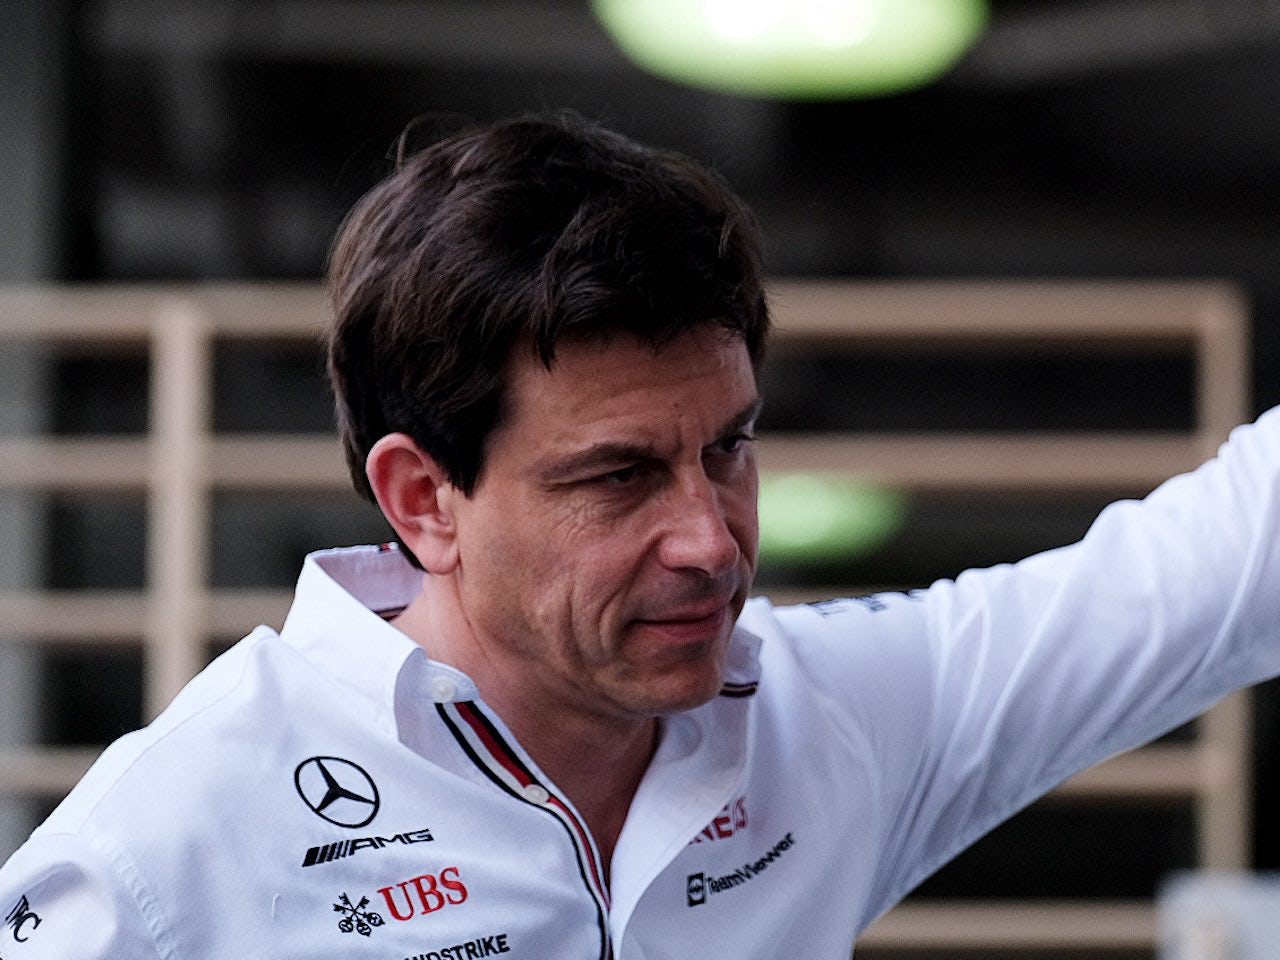 Updates won't be quick fix for Mercedes - Wolff